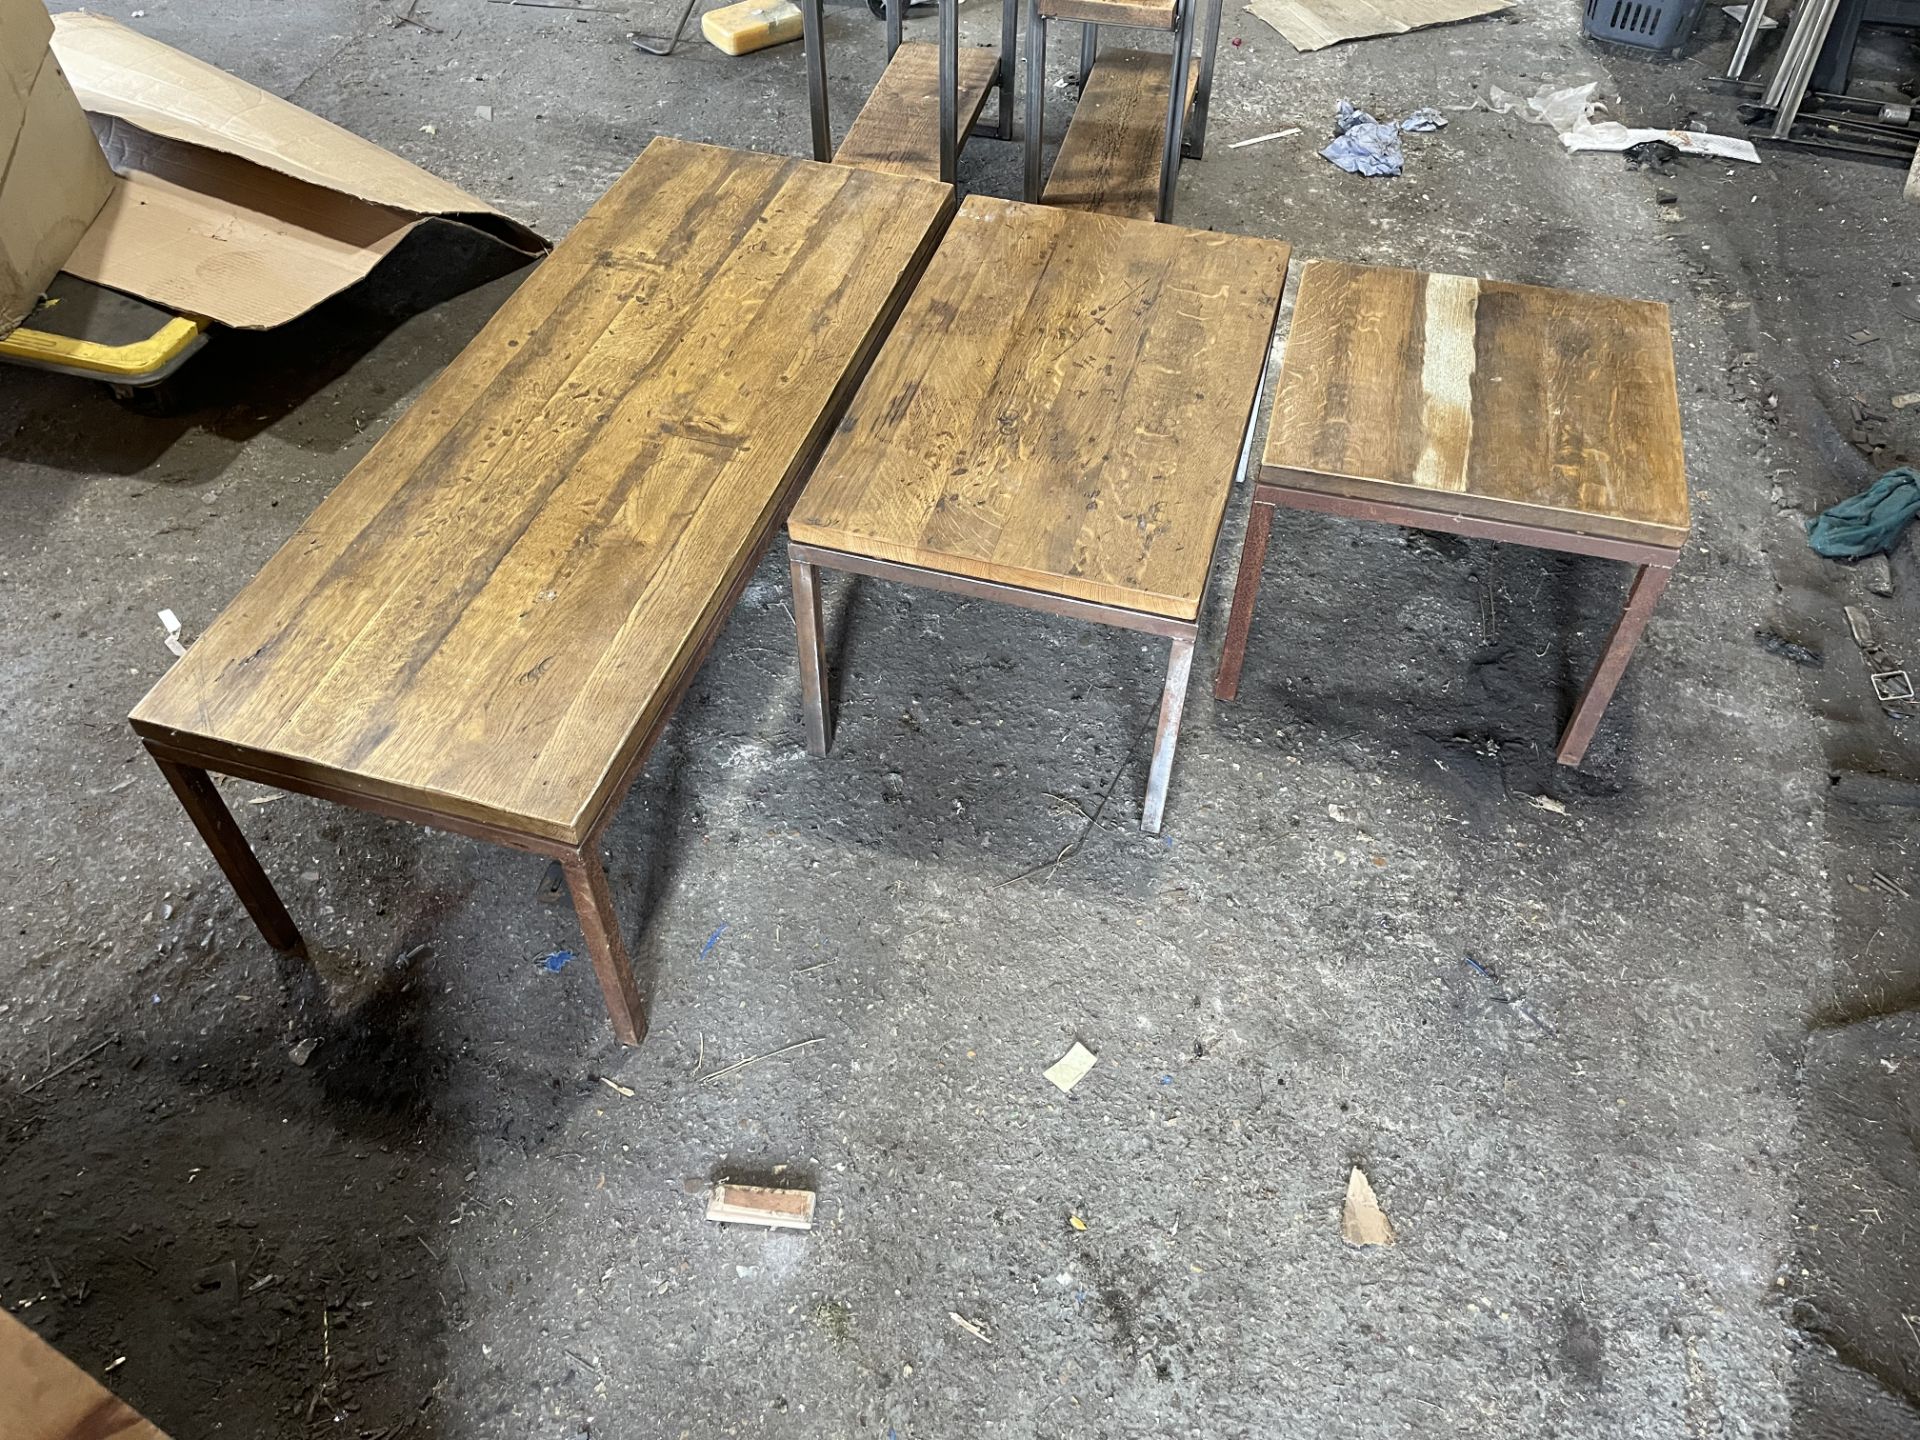 3 x Coffee/Side tables - (113cm x 45cm, 45cm x 72cm and 45cm x 45cm, all approx. 40cm high).